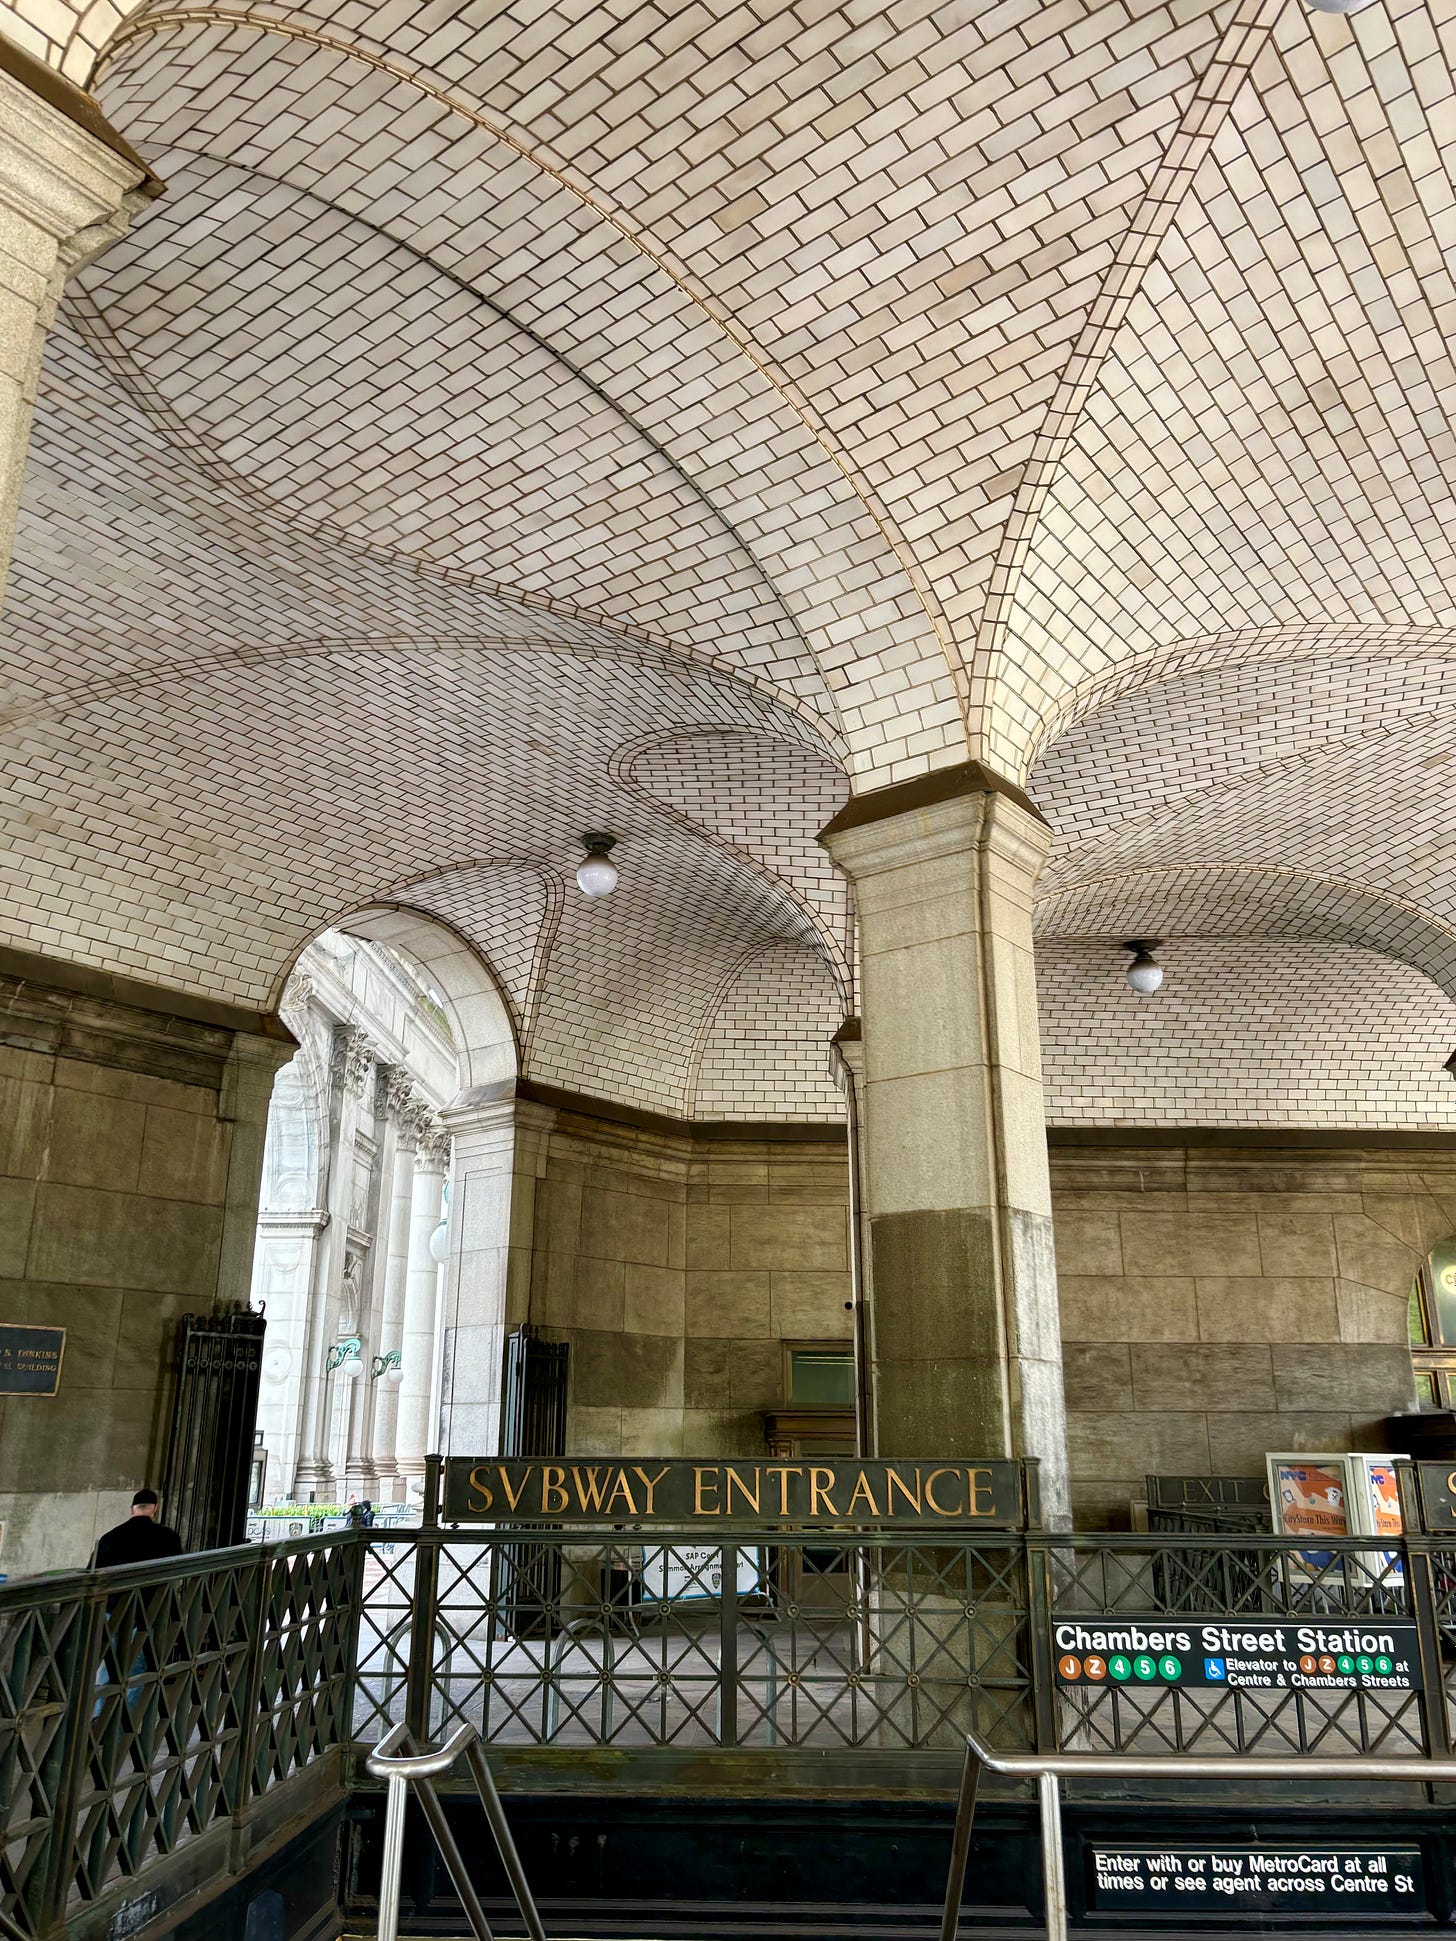 The Municipal Building entrance of the Chambers Street Station. The ceiling is high and graceful, a series of arches in elegant white tile.